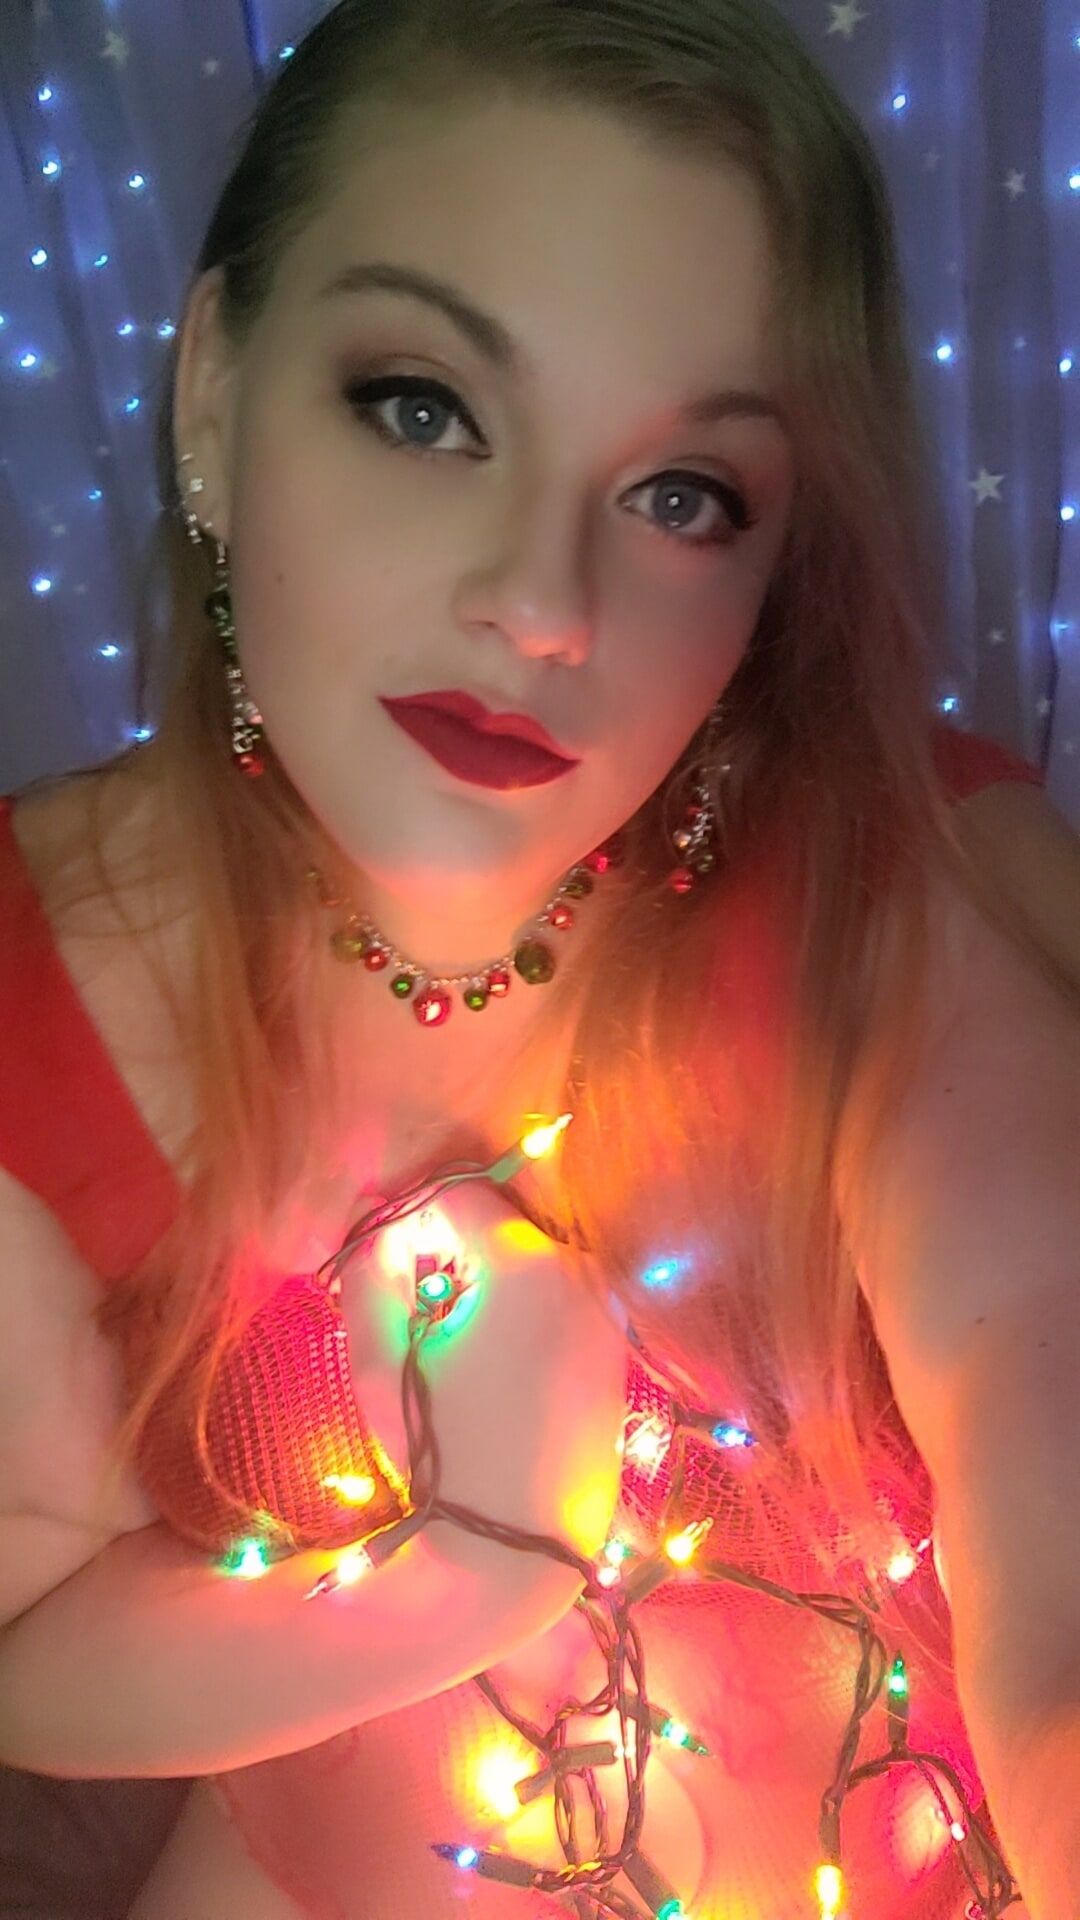 Bbw milf is your Christmas present #18